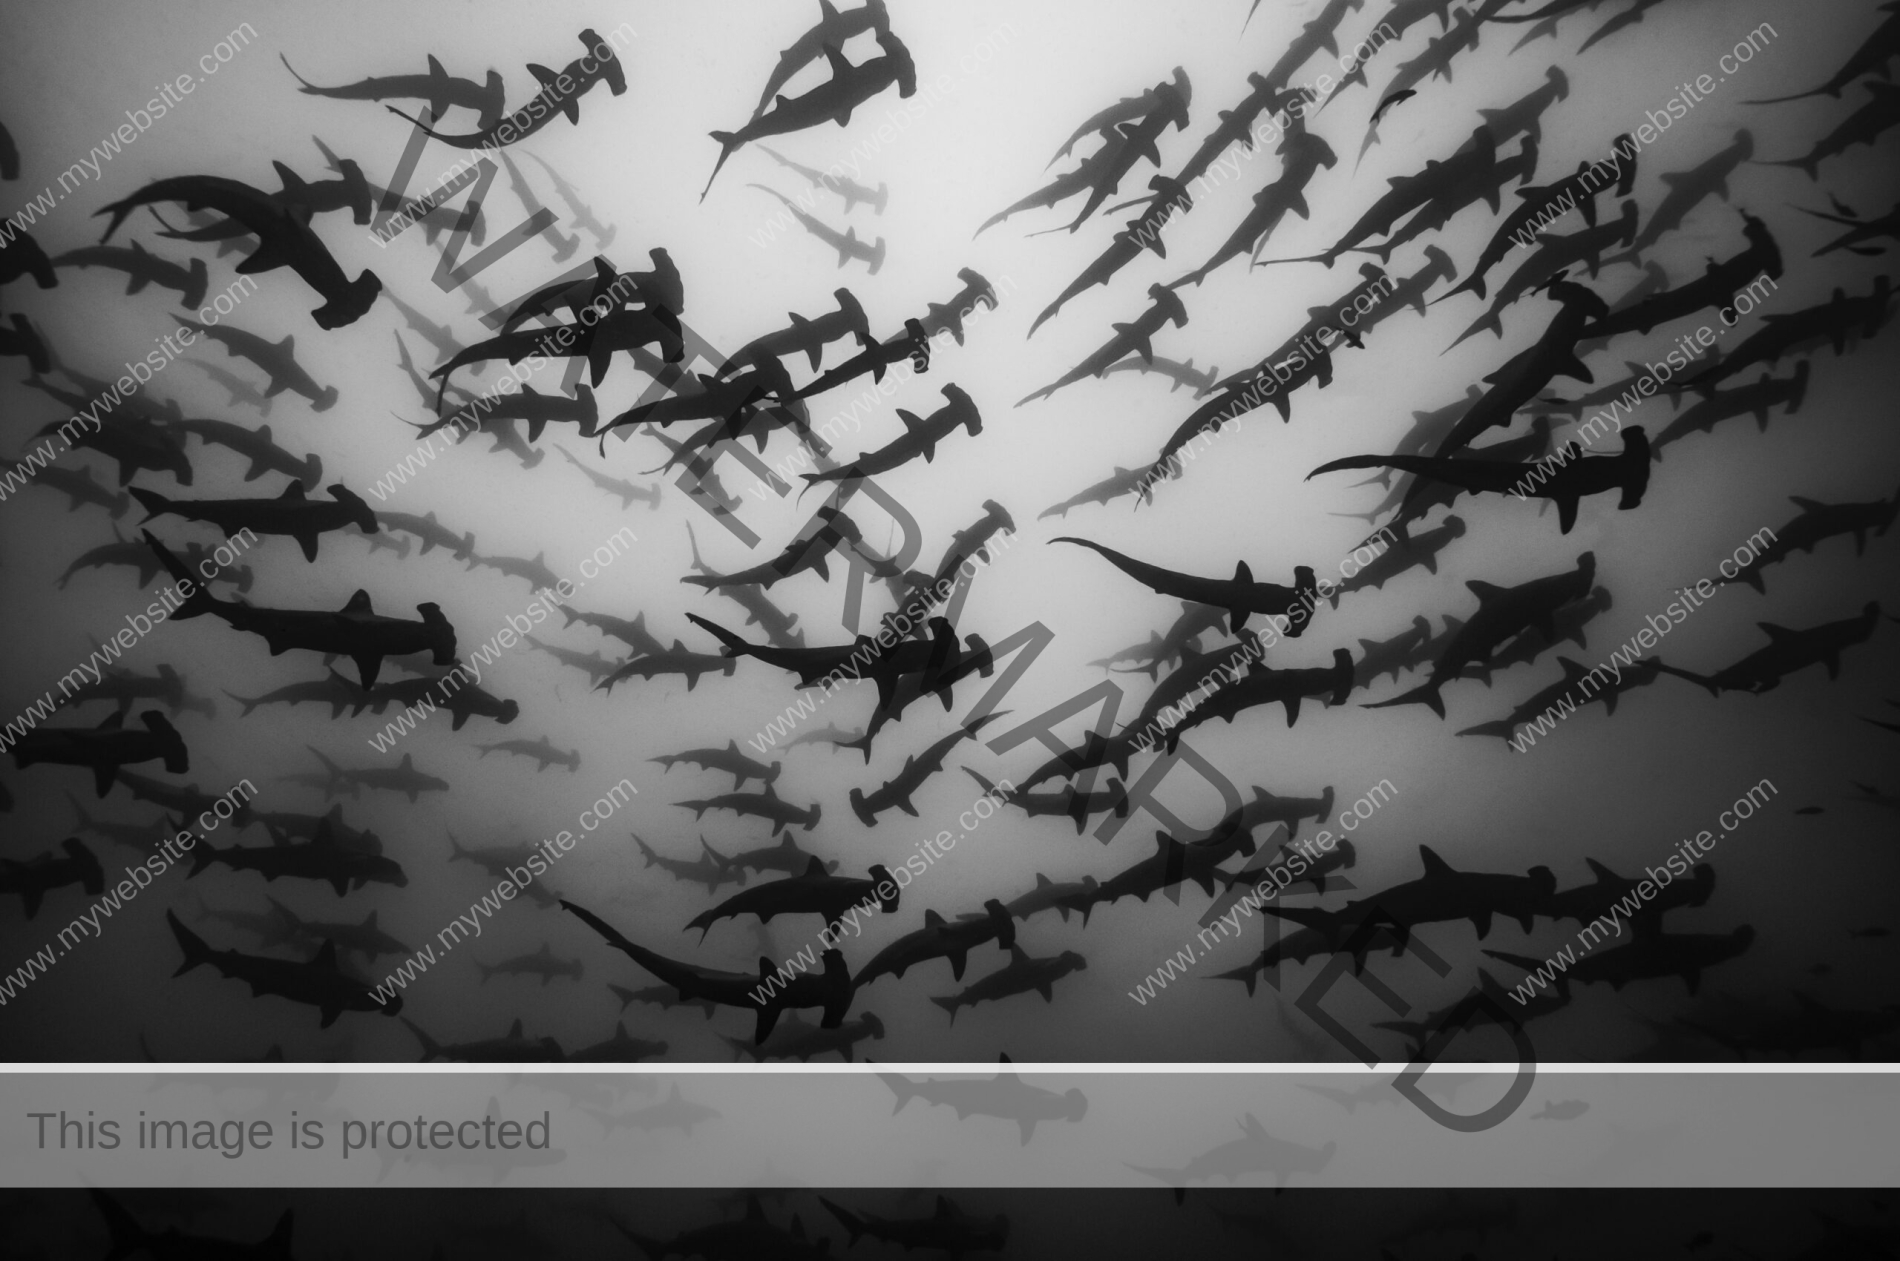 Serene black and white photograph of hundreds of scalloped hammerhead sharks by award-winning Colombian photographer Edwar Herreno. You are looking up at the sharks as they apepar to swim near the surface, evoking feelings of awe and wonder. Hammerhead shark photograph.